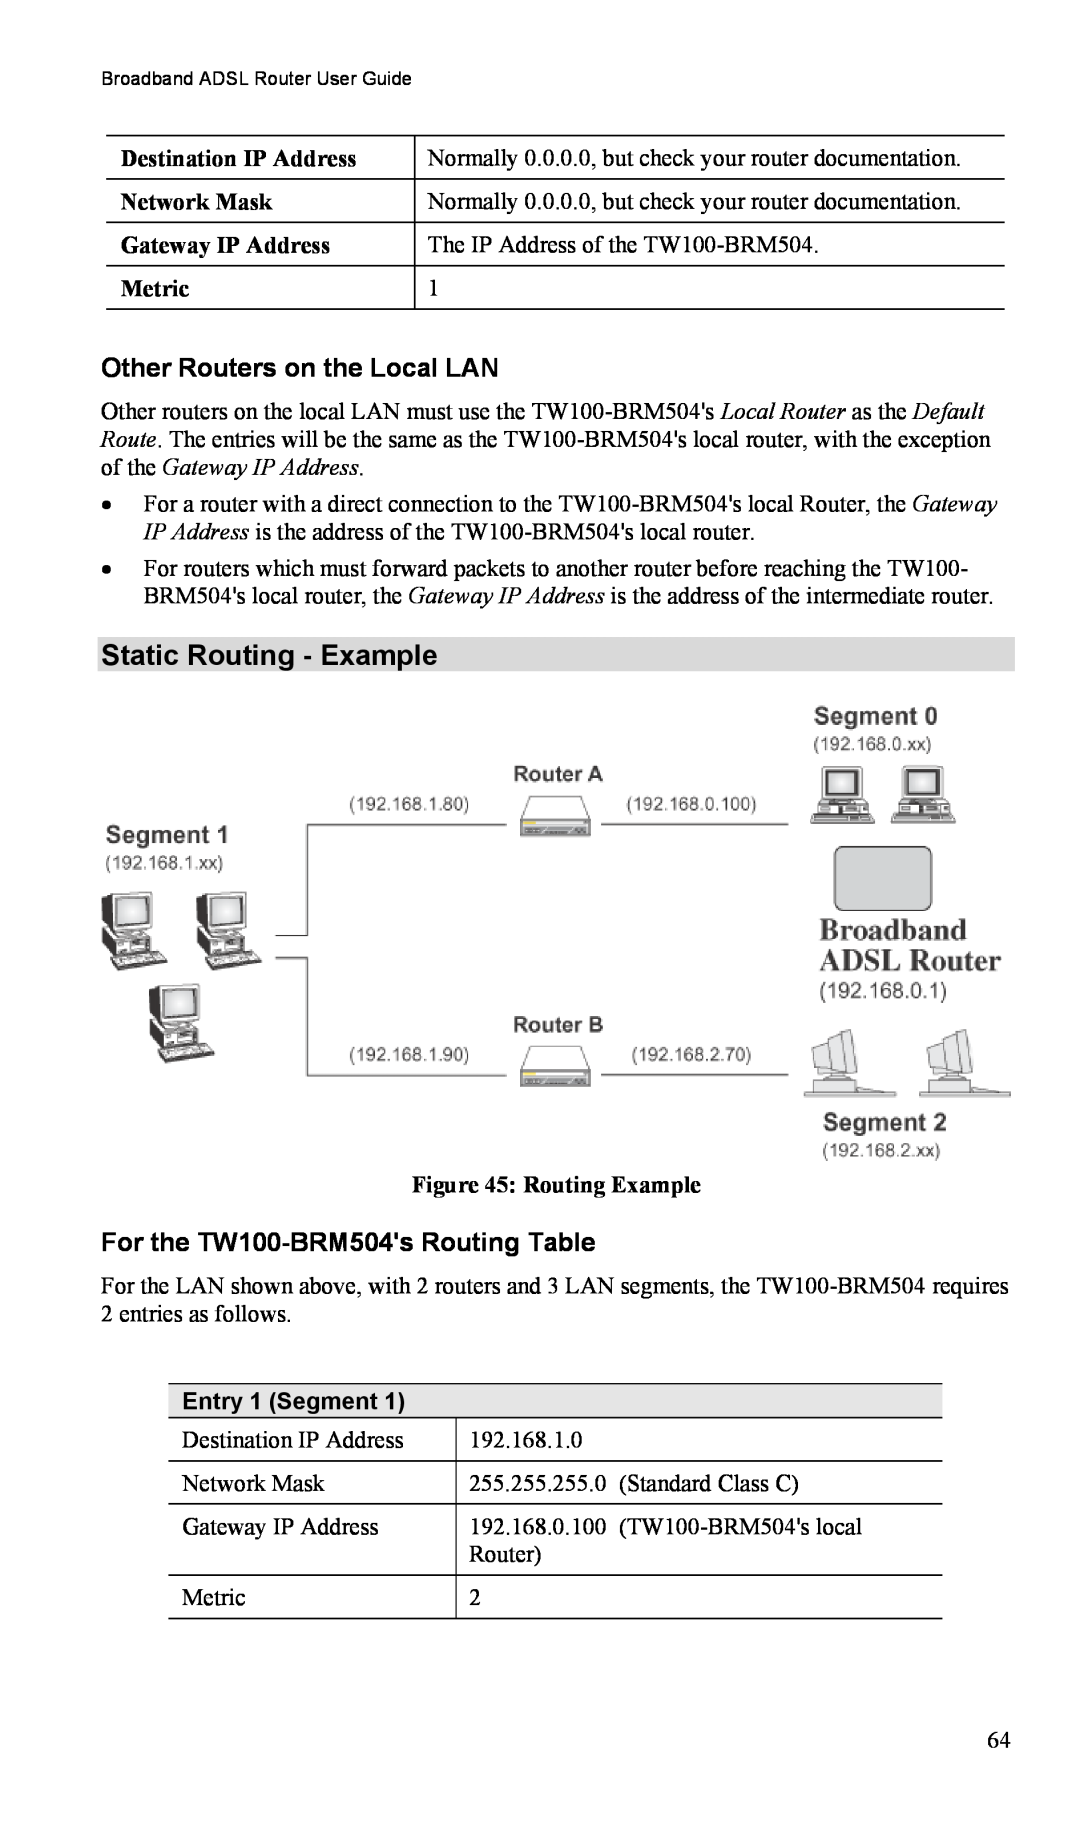 TRENDnet Static Routing - Example, Other Routers on the Local LAN, For the TW100-BRM504sRouting Table, Entry 1 Segment 